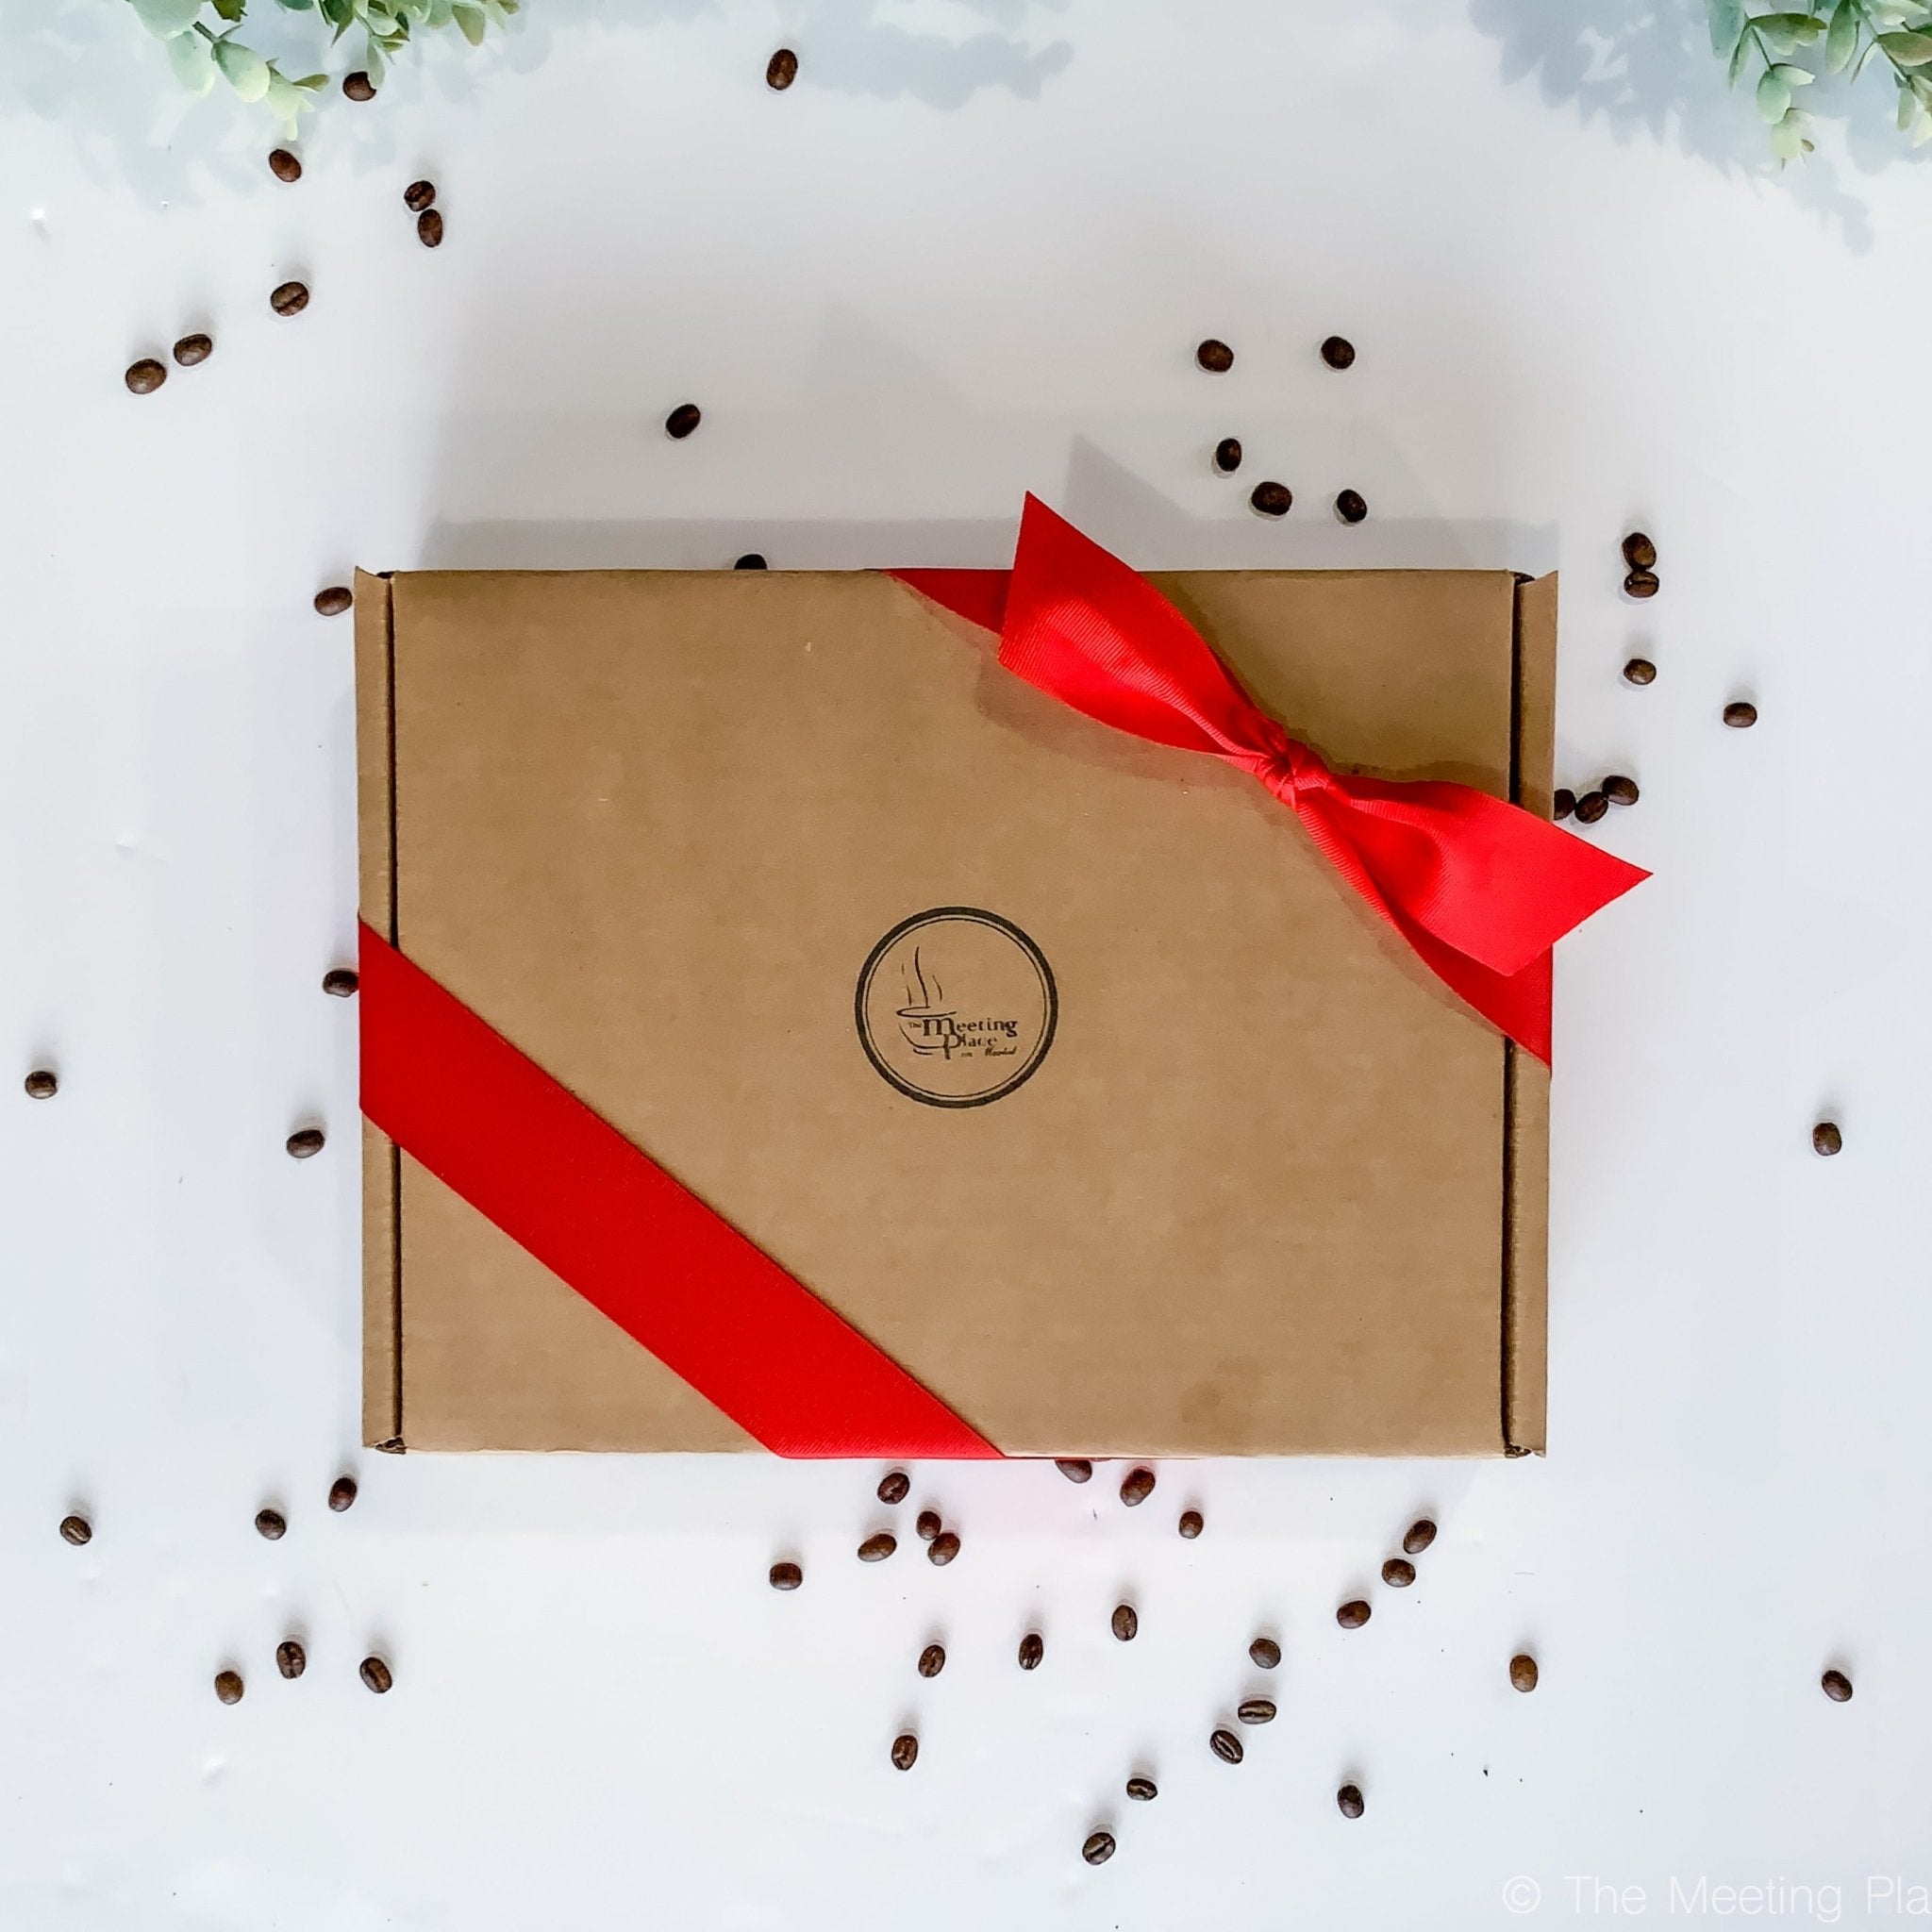 5 Corporate Gift Ideas Your Clients Will Love